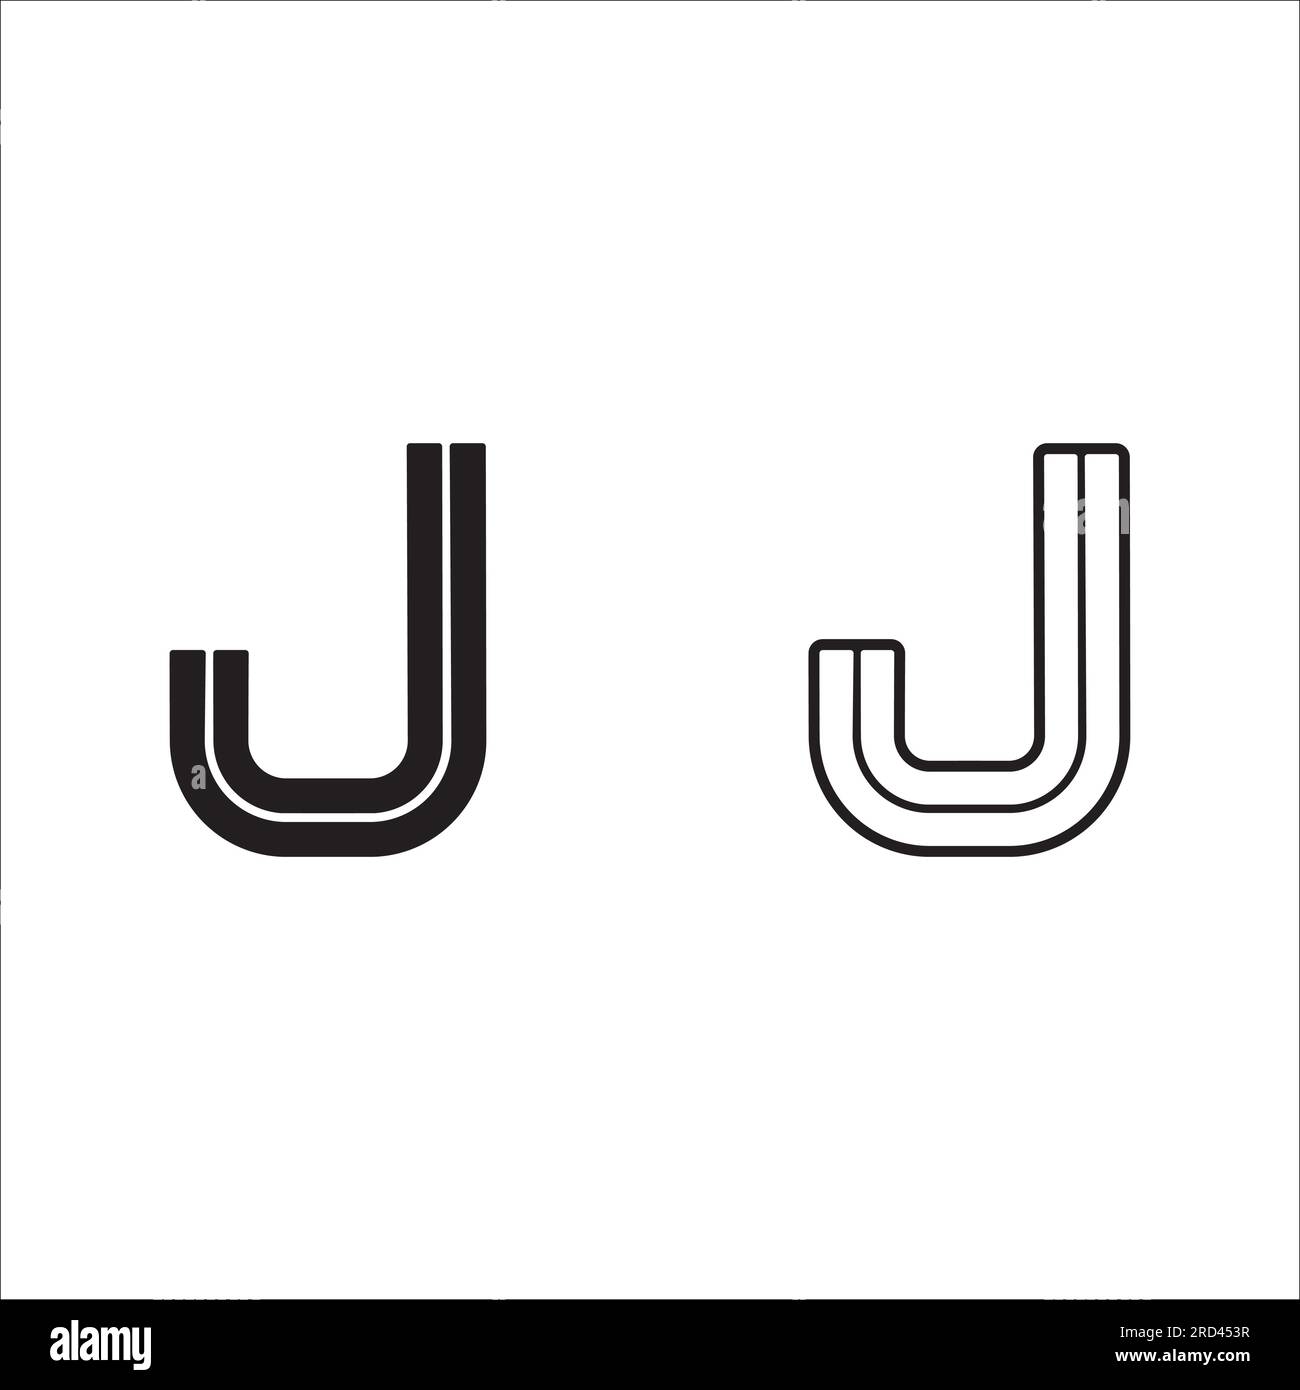 Simple Initial Letter j Logo. Usable for Business and Branding Logos. Flat Vector Logo Design Template Element. Stock Vector